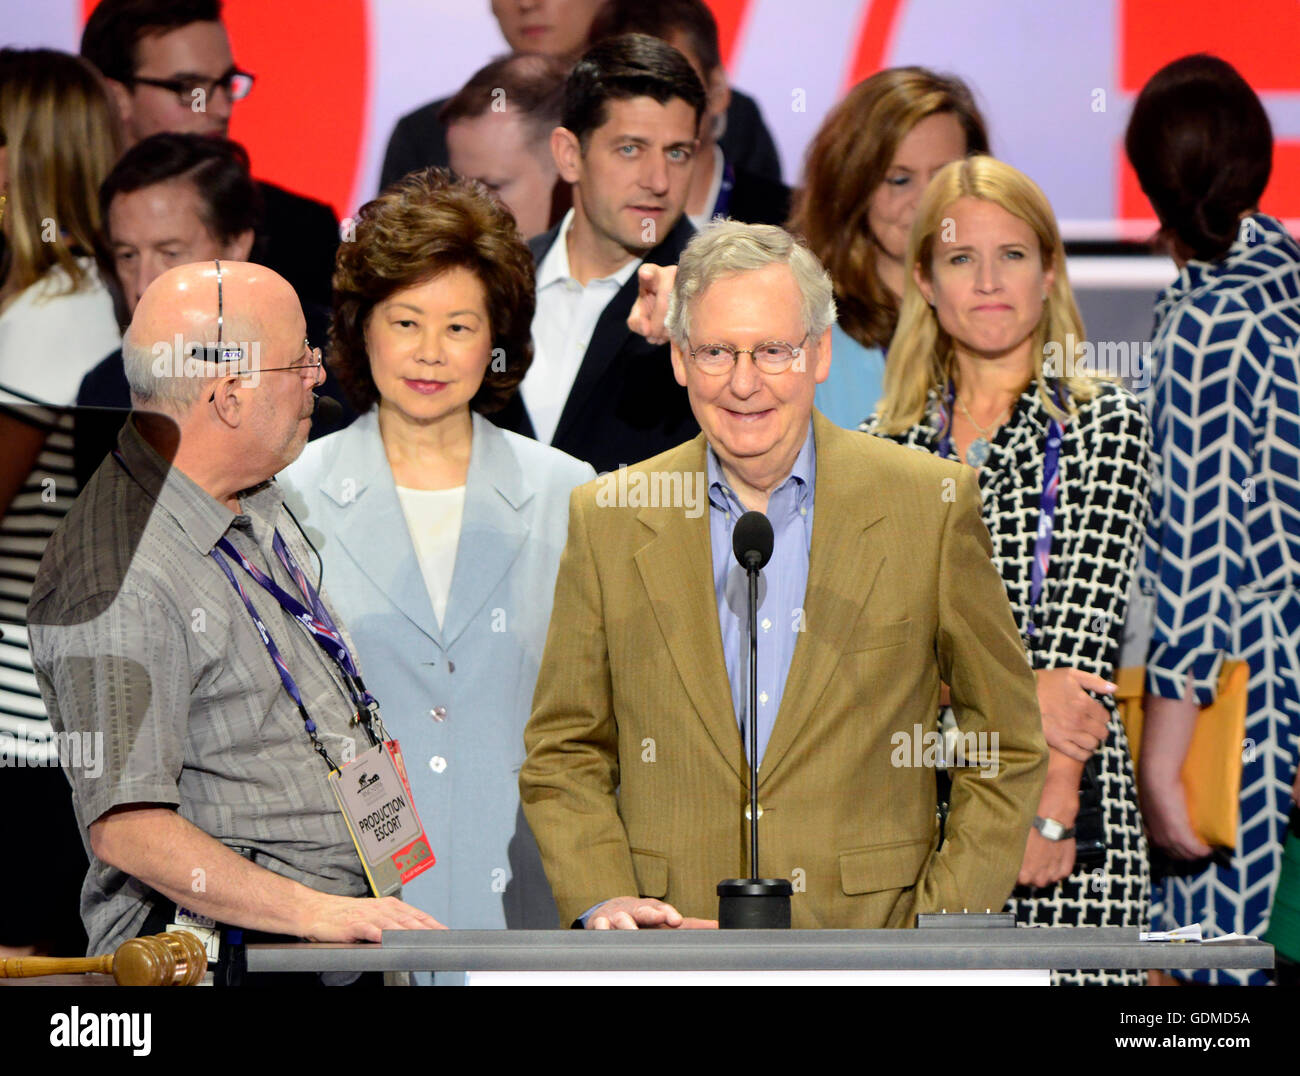 United States Senate Majority Leader Mitch McConnell (Republican of Kentucky) and his wife, Elaine Chao participate in a rehearsal prior to the 2016 Republican National Convention in Cleveland, Ohio on Sunday, July 17, 2016. Standing behind them and pointing is US Speaker of the House Paul Ryan (Republican of Wisconsin) and his wife Janna. Credit: Ron Sachs / CNP (RESTRICTION: NO New York or New Jersey Newspapers or newspapers within a 75 mile radius of New York City) - NO WIRE SERVICE - Stock Photo